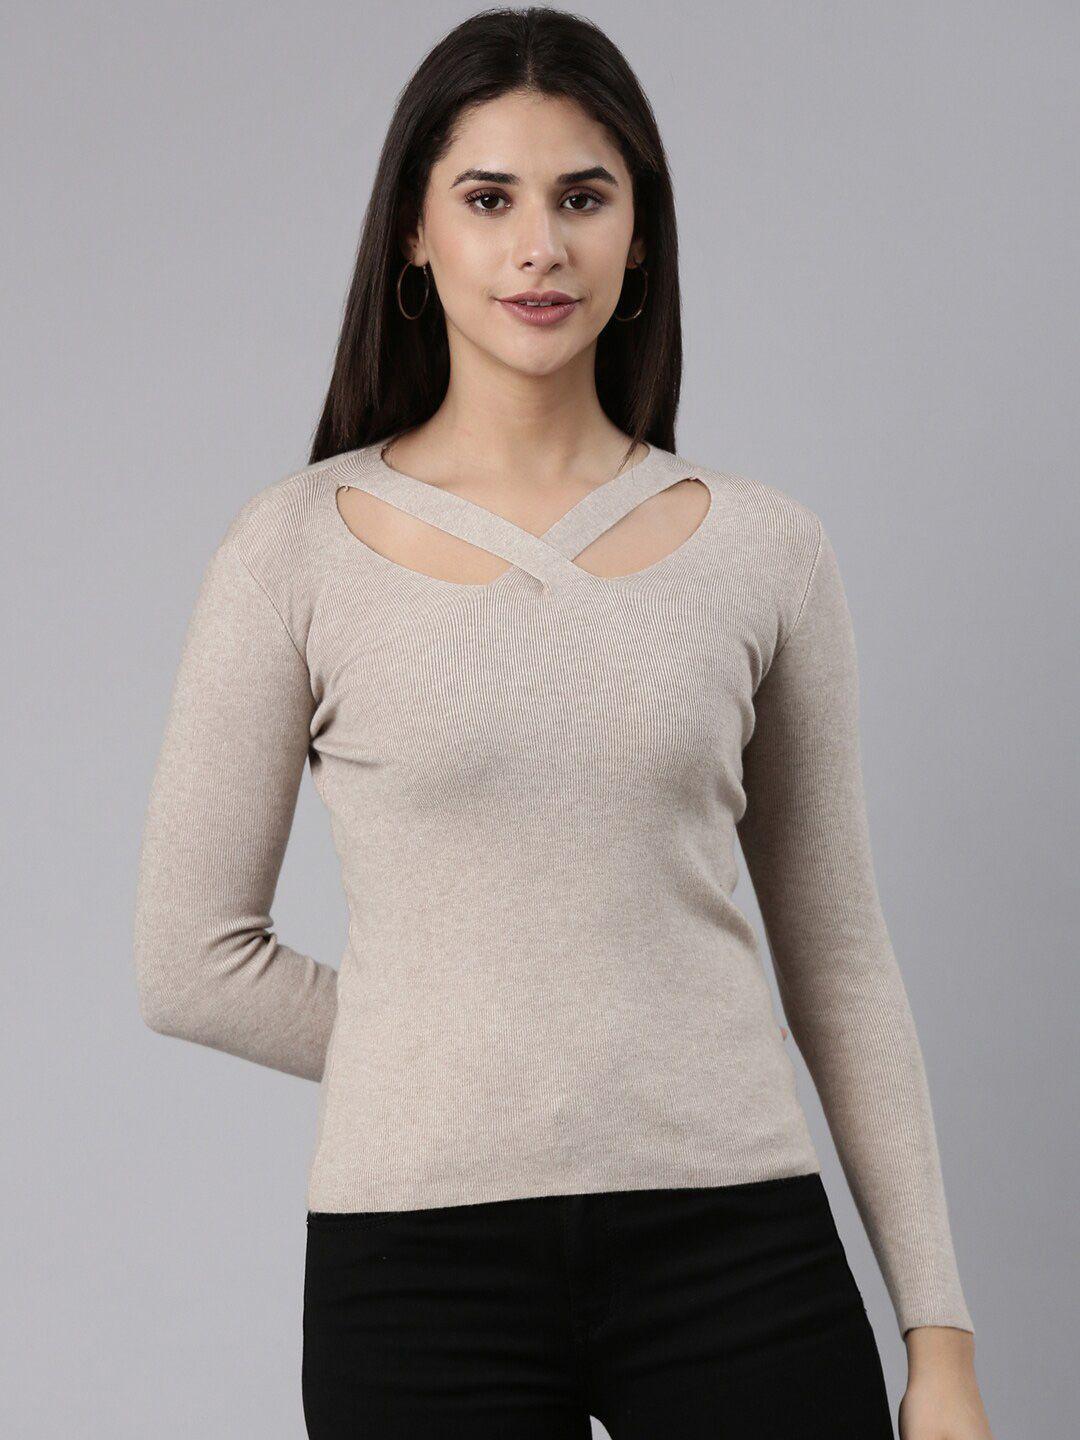 showoff long sleeves v-neck cut out detail fitted top